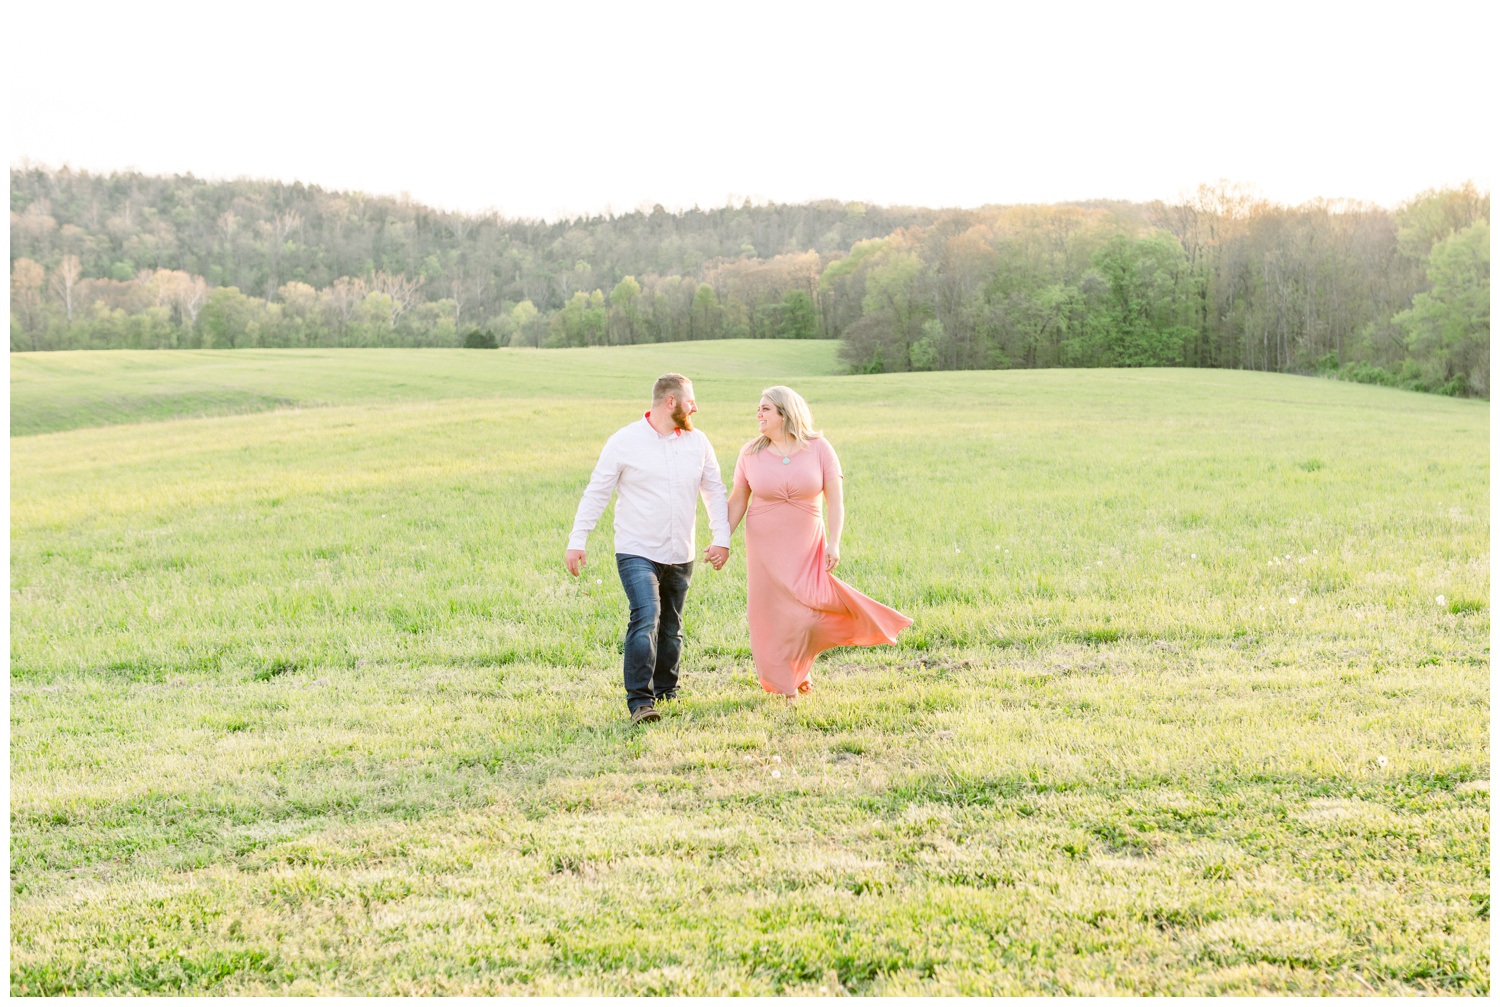 Falmouth Kentucky Engagement Pictures - Misty Maple Gardens